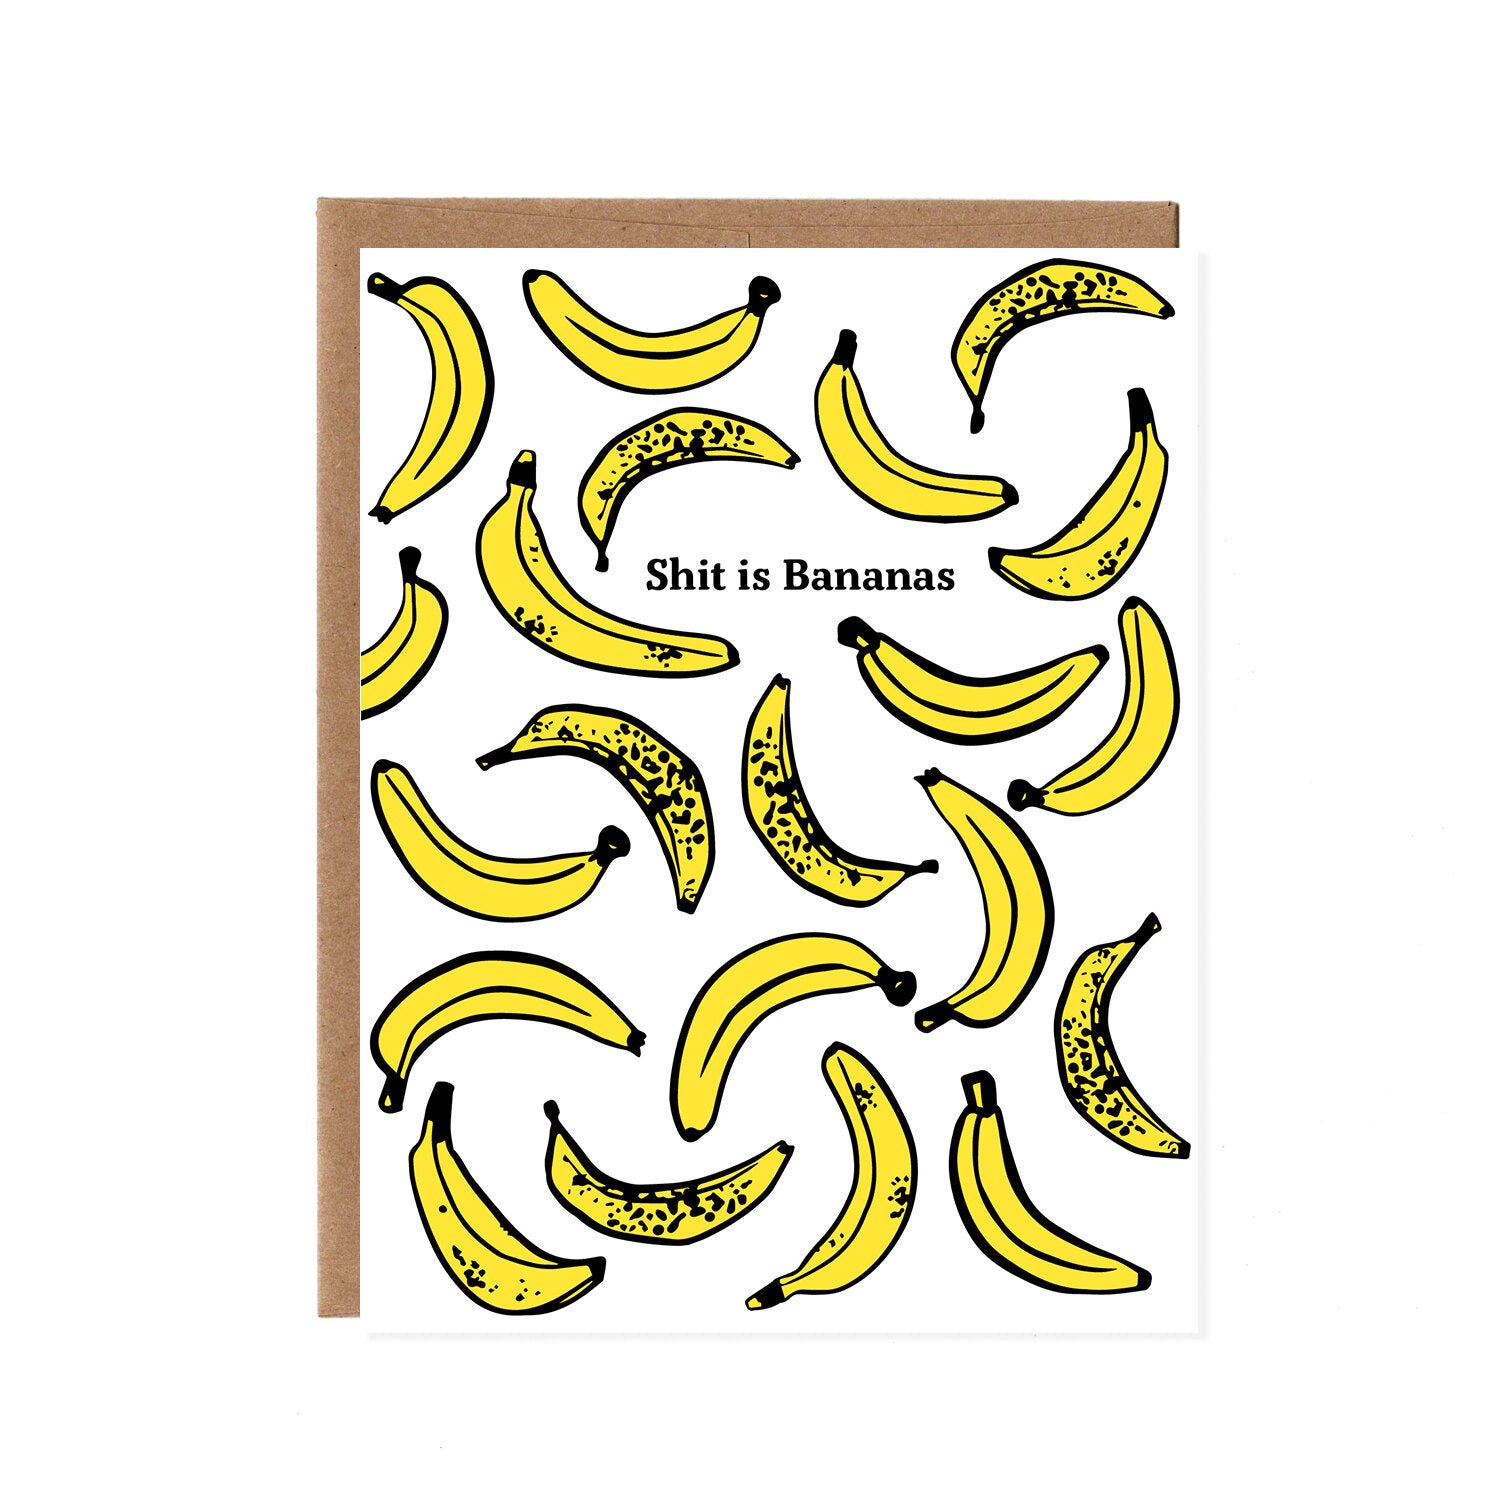 Product image for Shit is Bananas Card